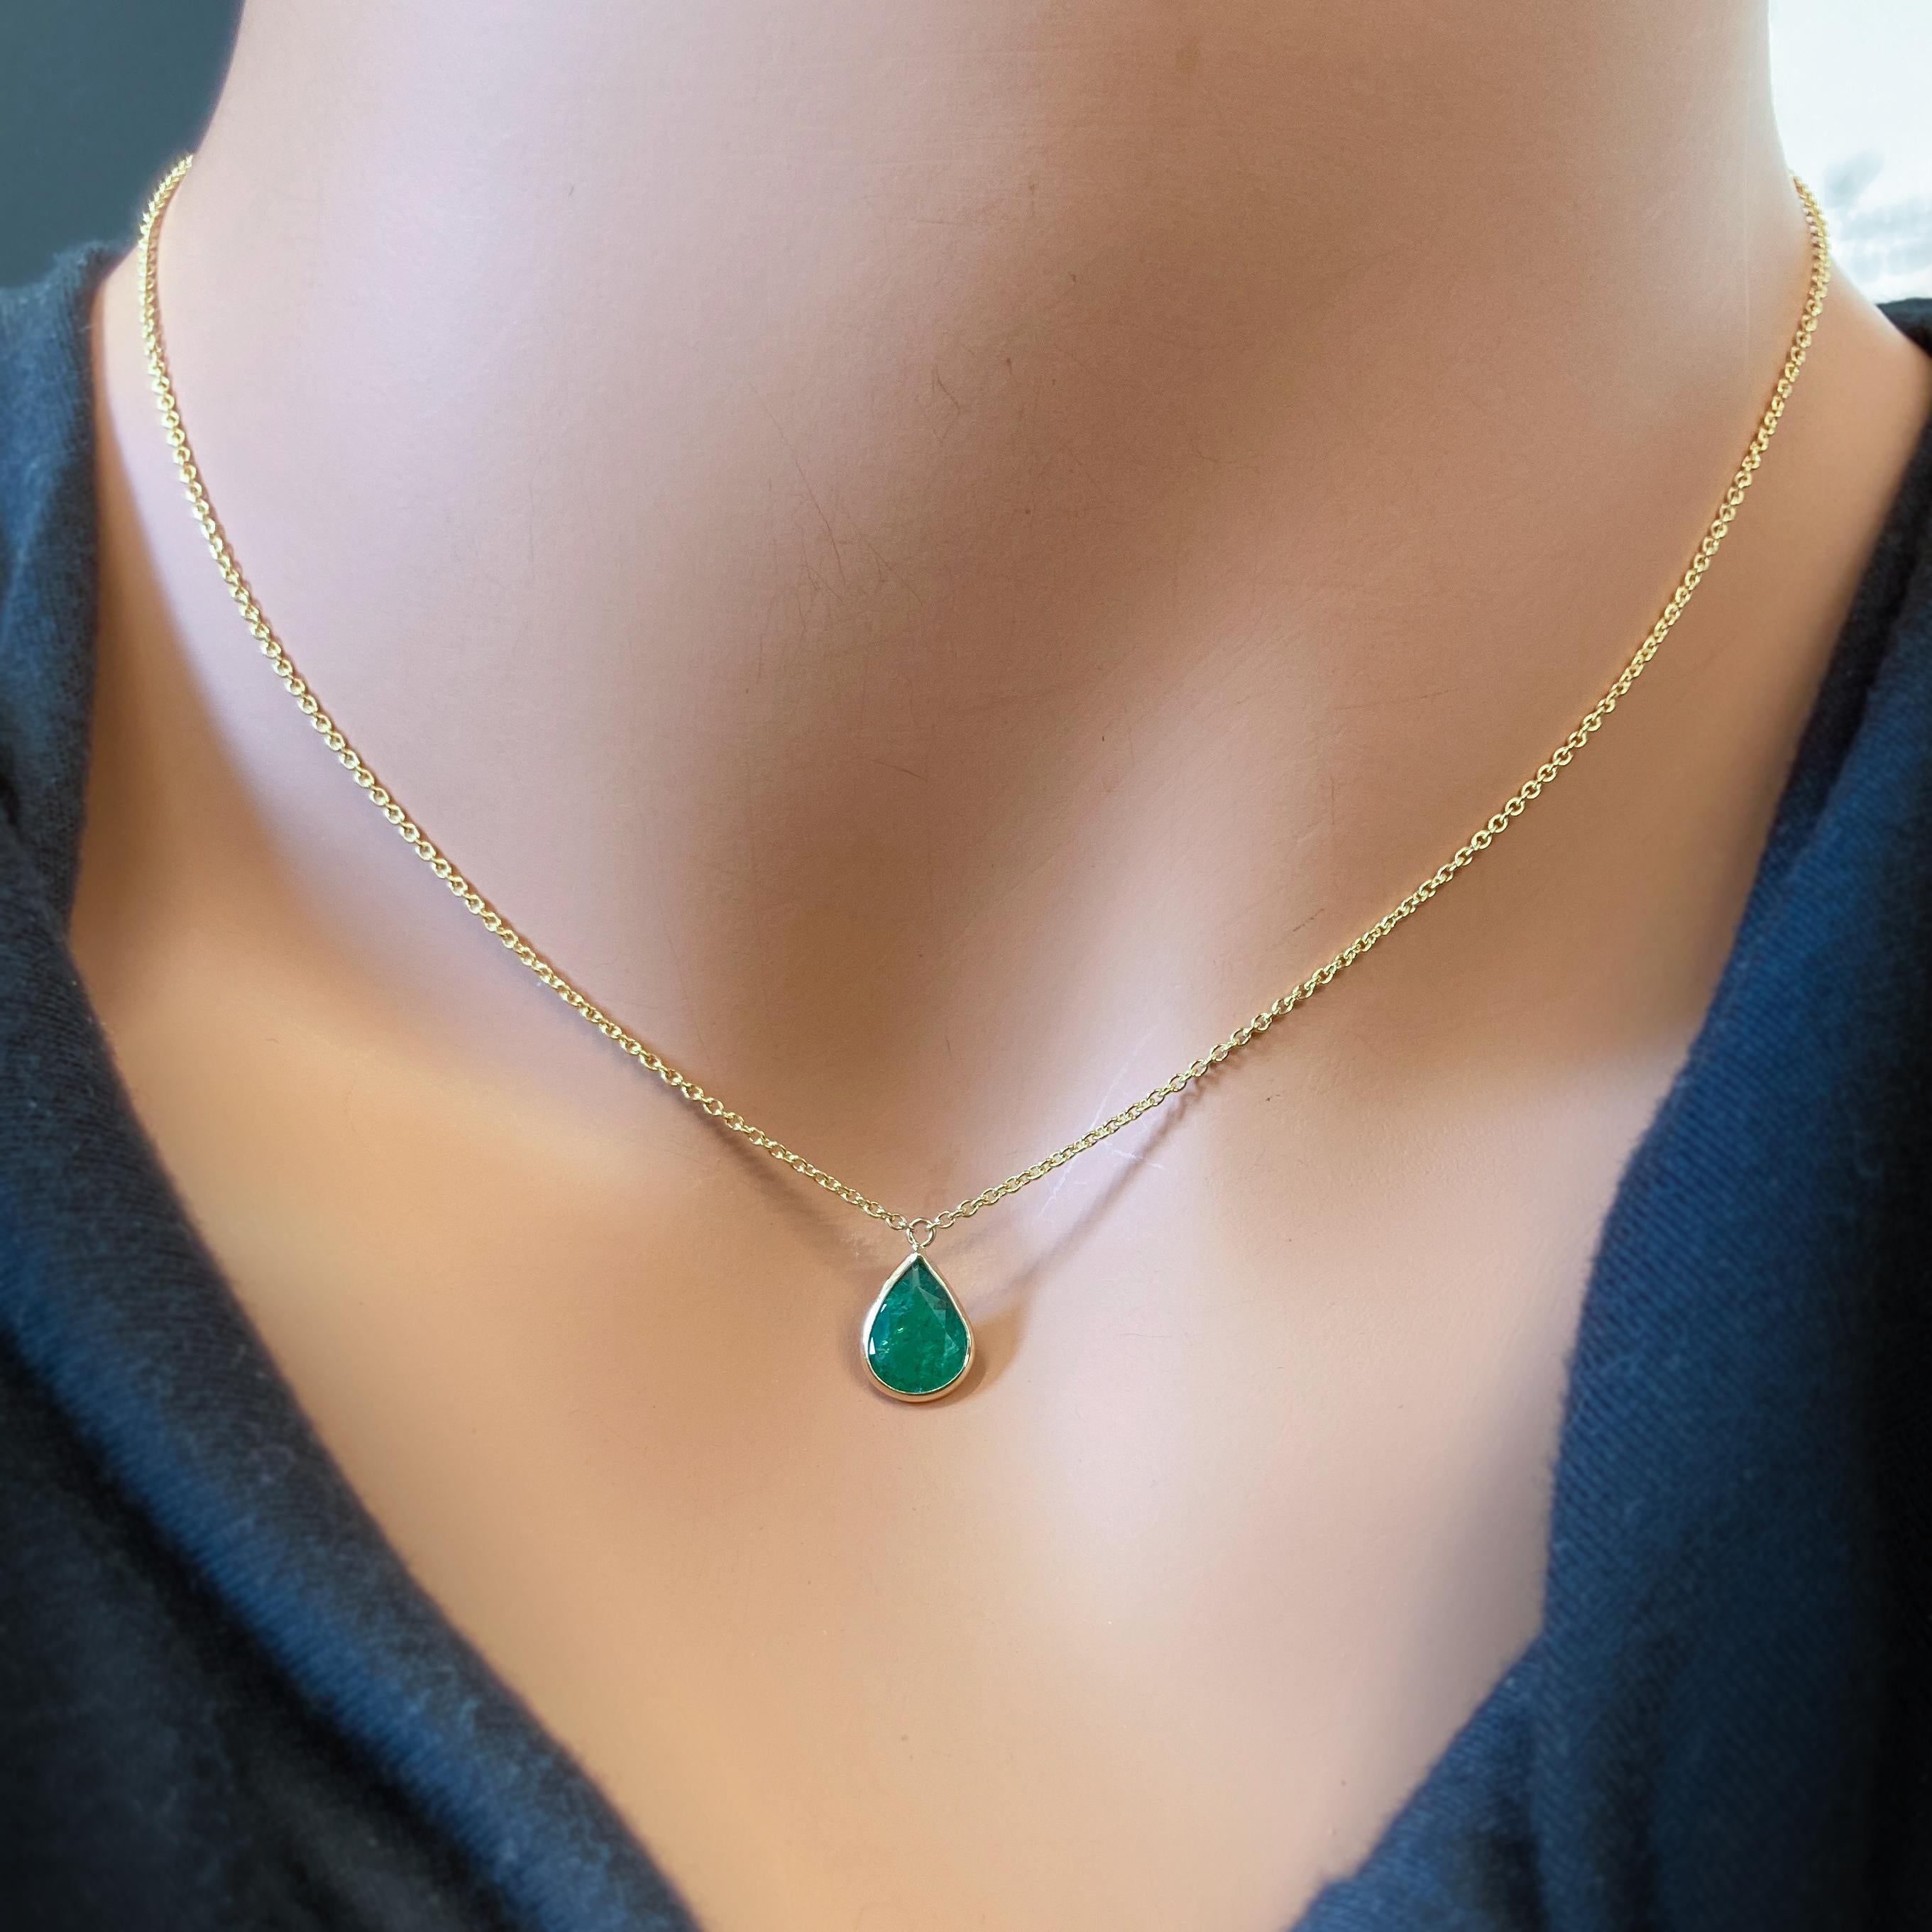 Contemporary 1.22 Carat Green Emerald Pear Shape Fashion Necklaces In 14K Yellow Gold For Sale